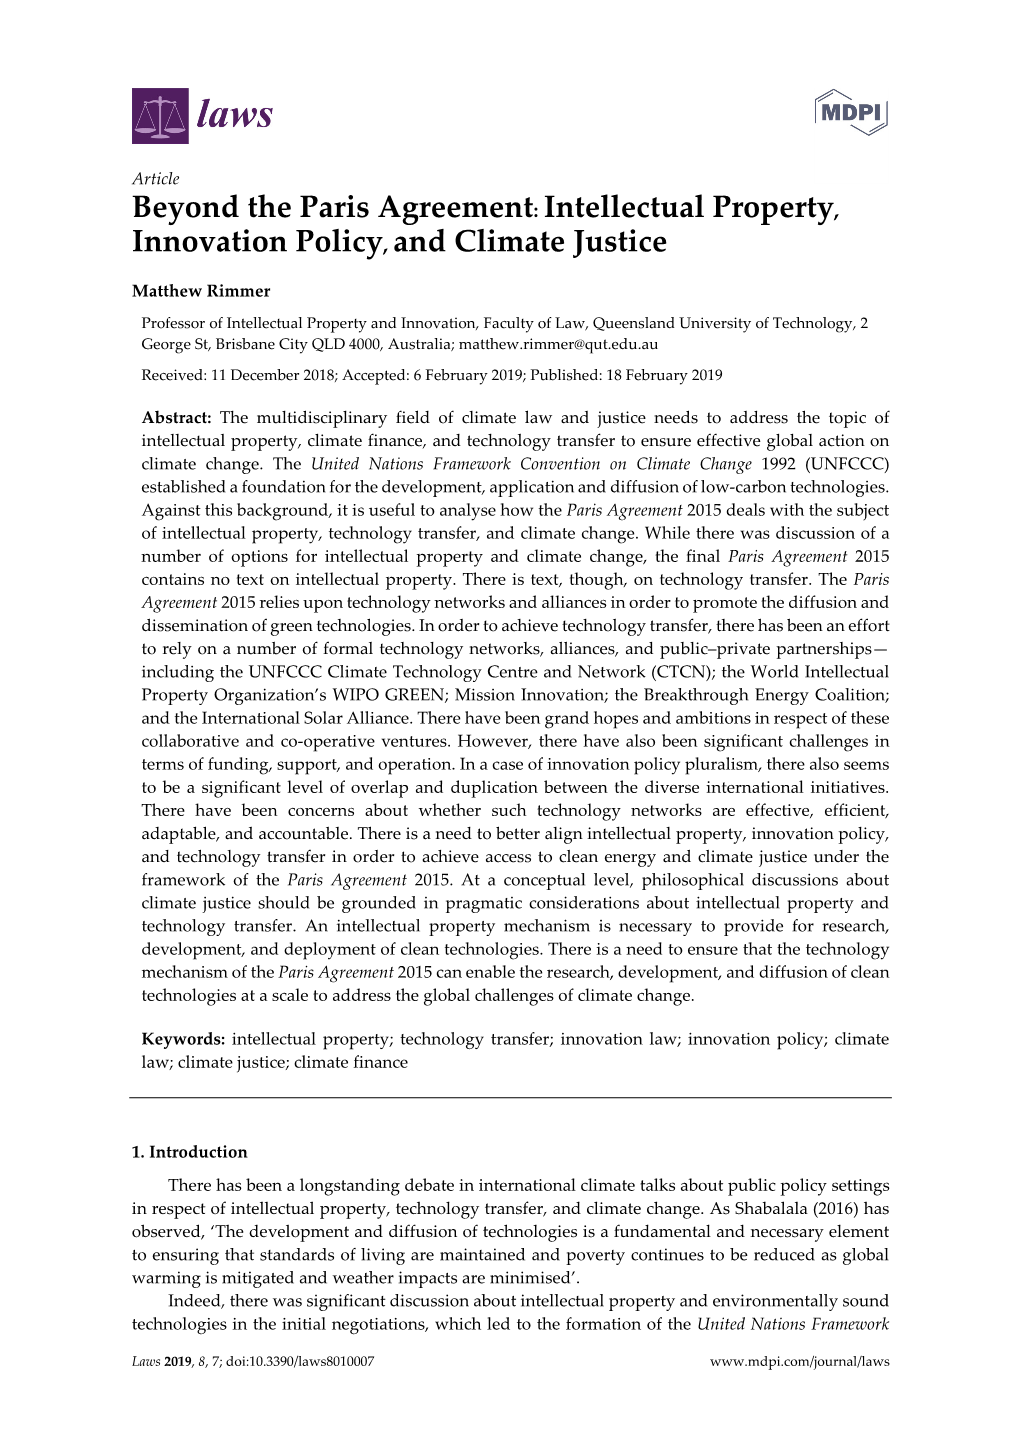 Intellectual Property, Innovation Policy, and Climate Justice